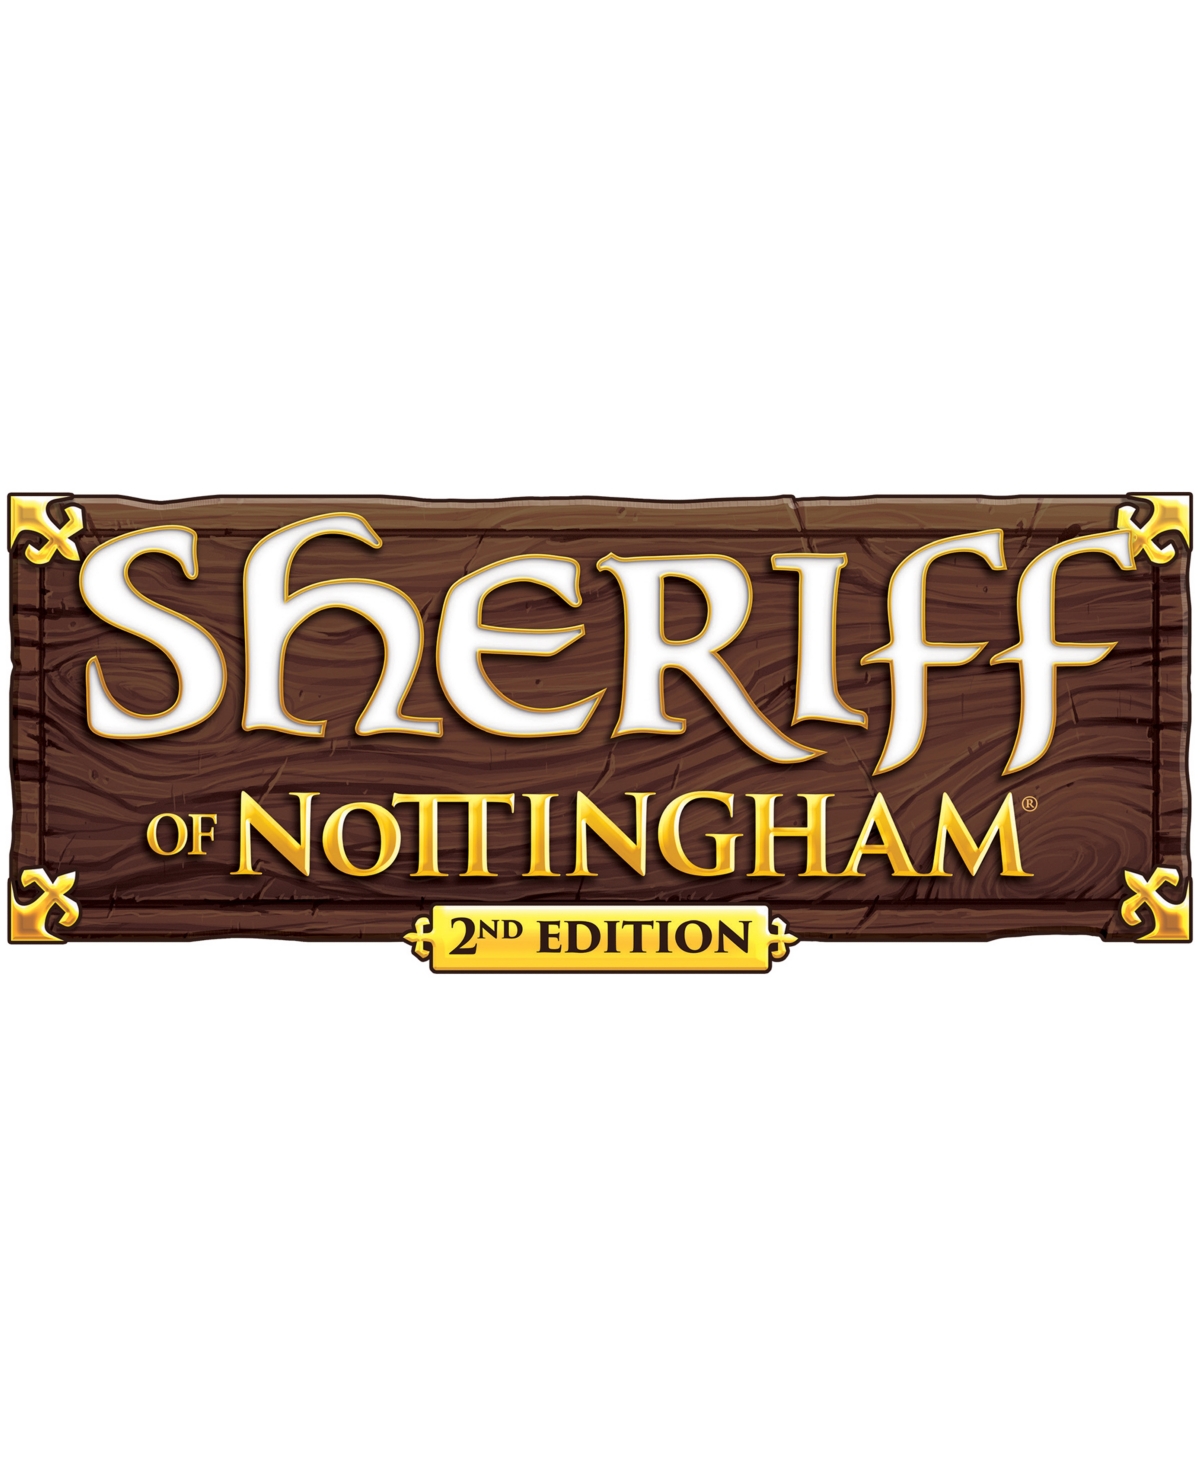 Shop University Games Cmon Sheriff Of Nottingham Game 2nd Edition In No Color